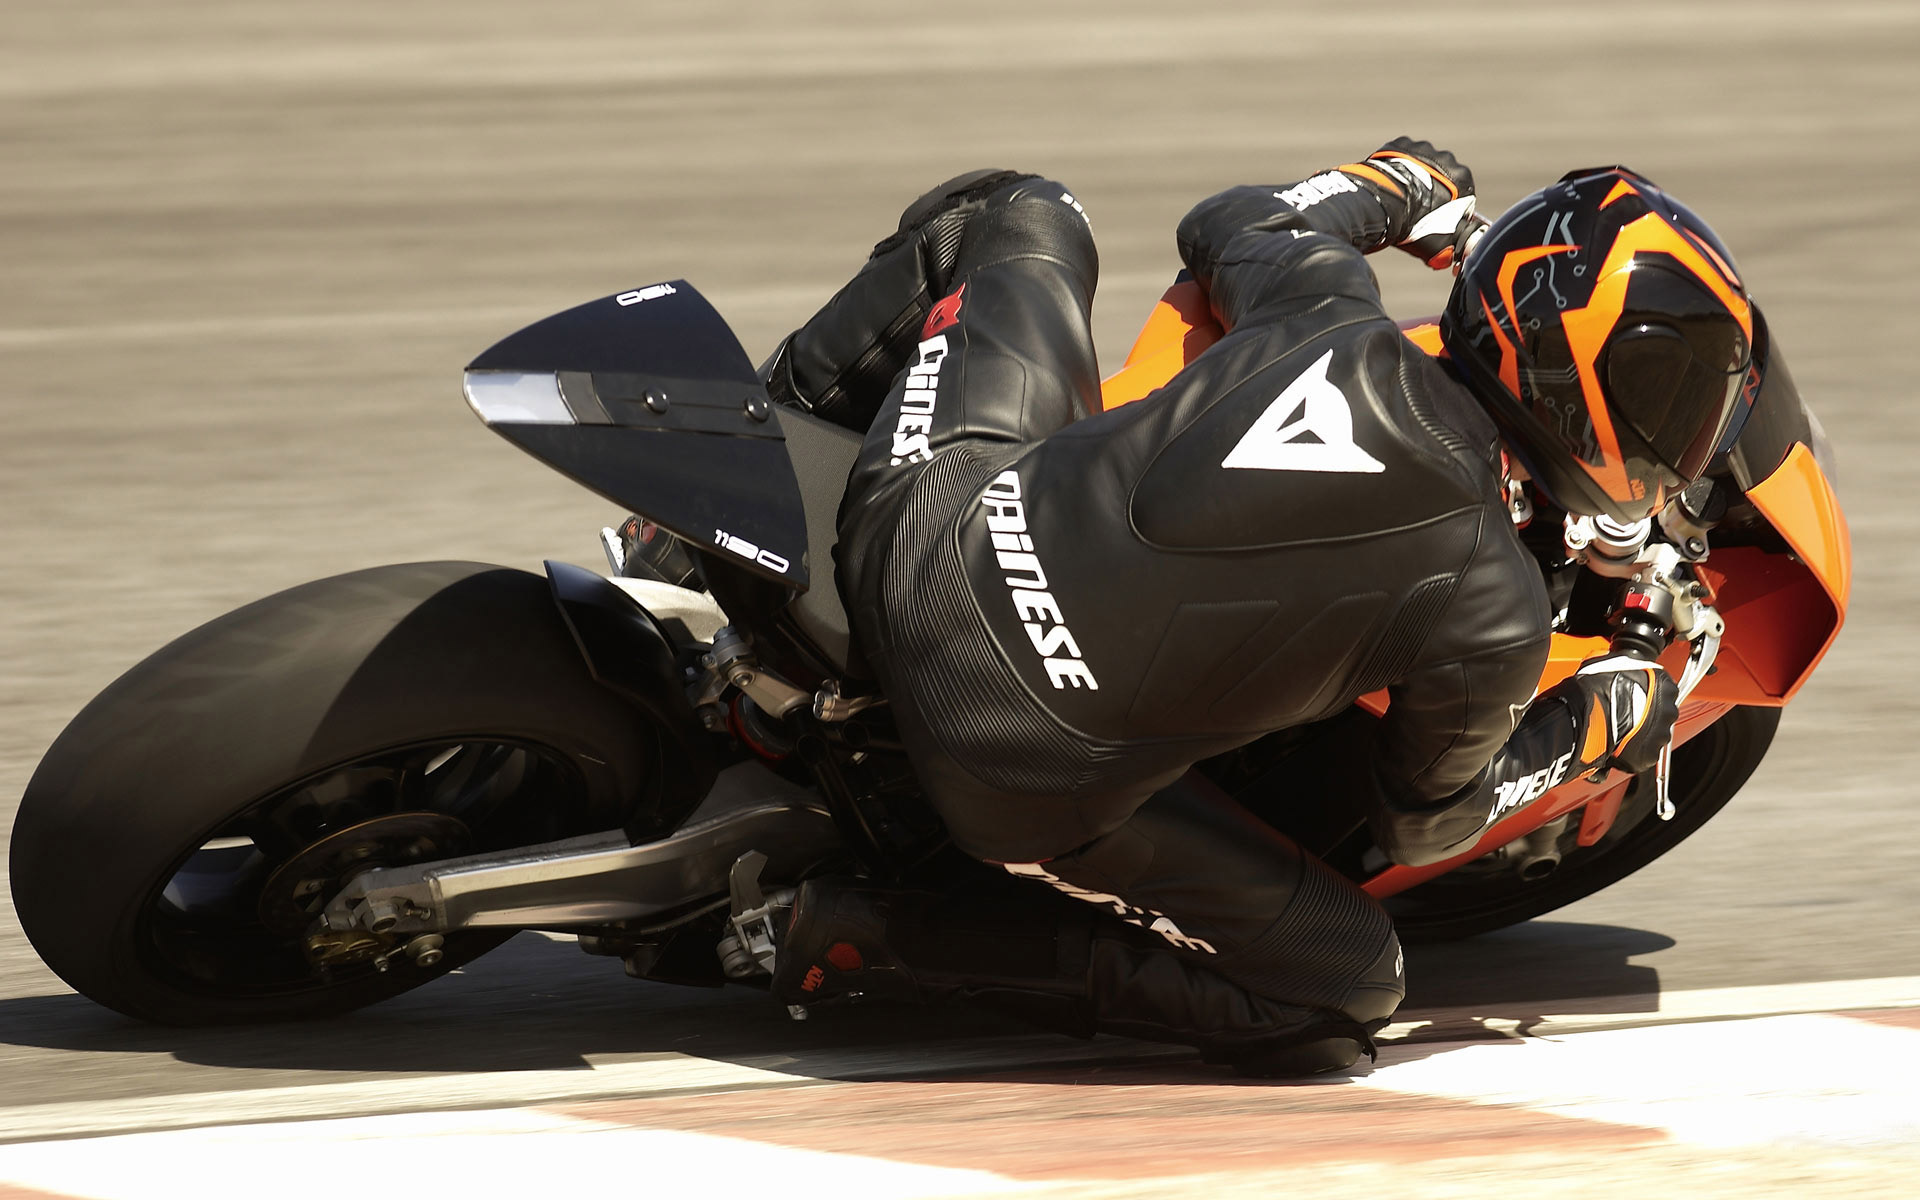 Motorcycle Racing: Masterful Cornering, Safety Gear, Superbike Race. 1920x1200 HD Wallpaper.